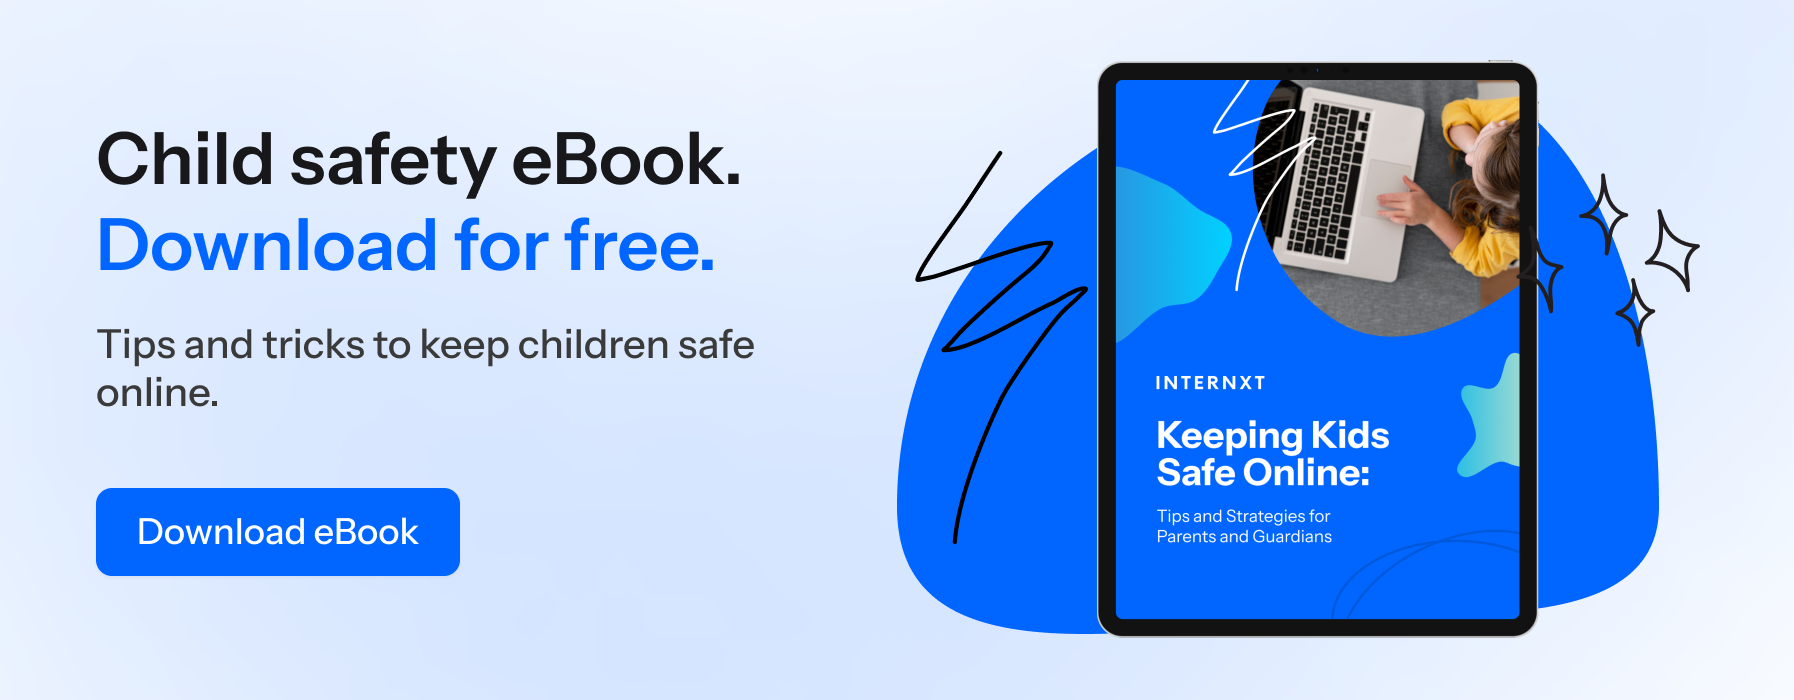 Internxt child safety eBook offers tips to protect children online. 